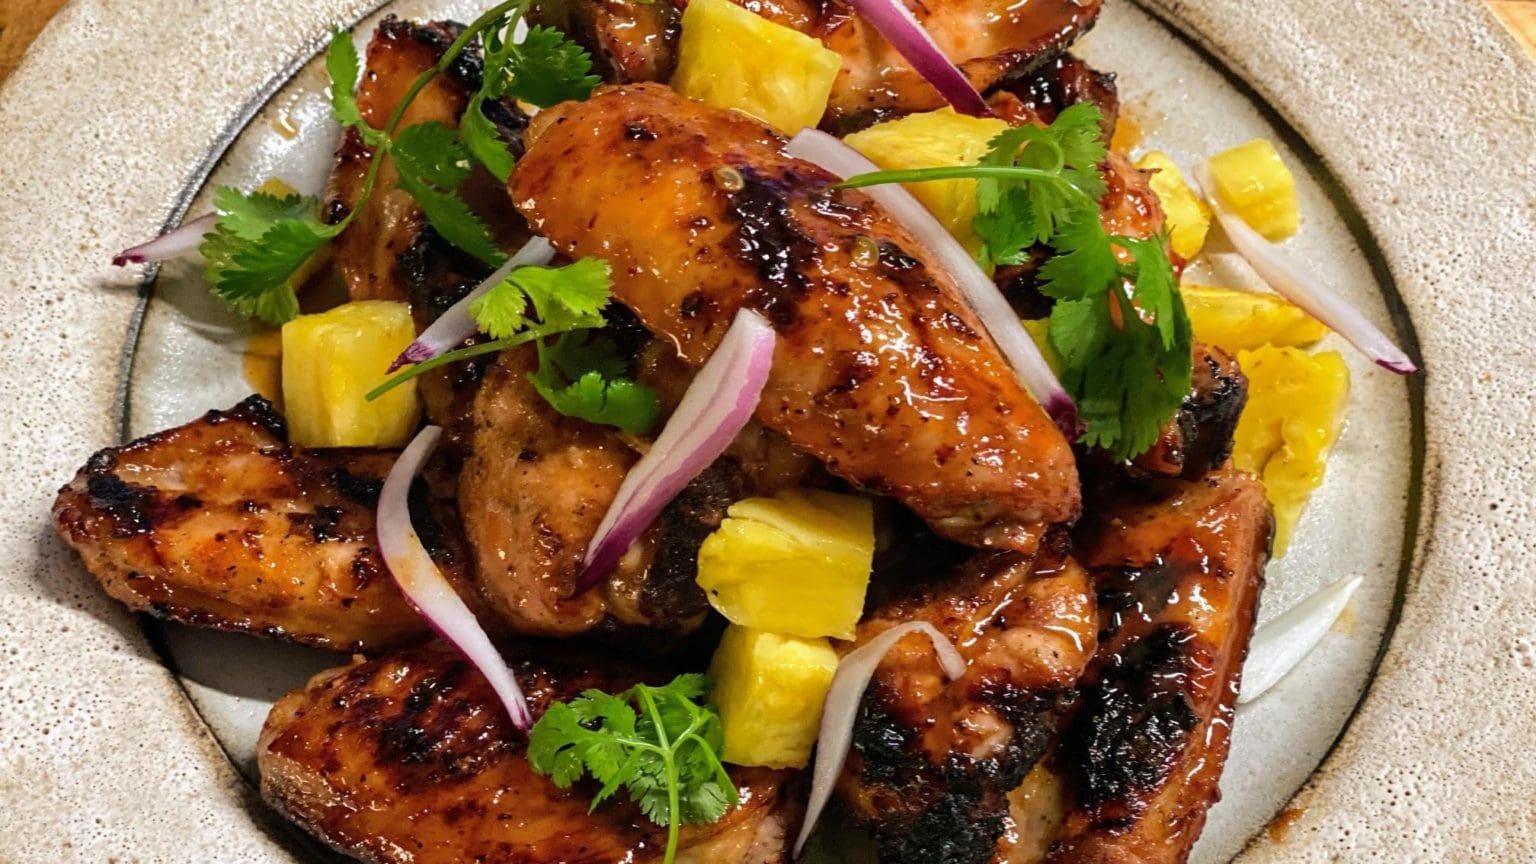 Pasture Raised and Certified Organic chicken wings barbequed served with pineapple and cilantro on a plate.